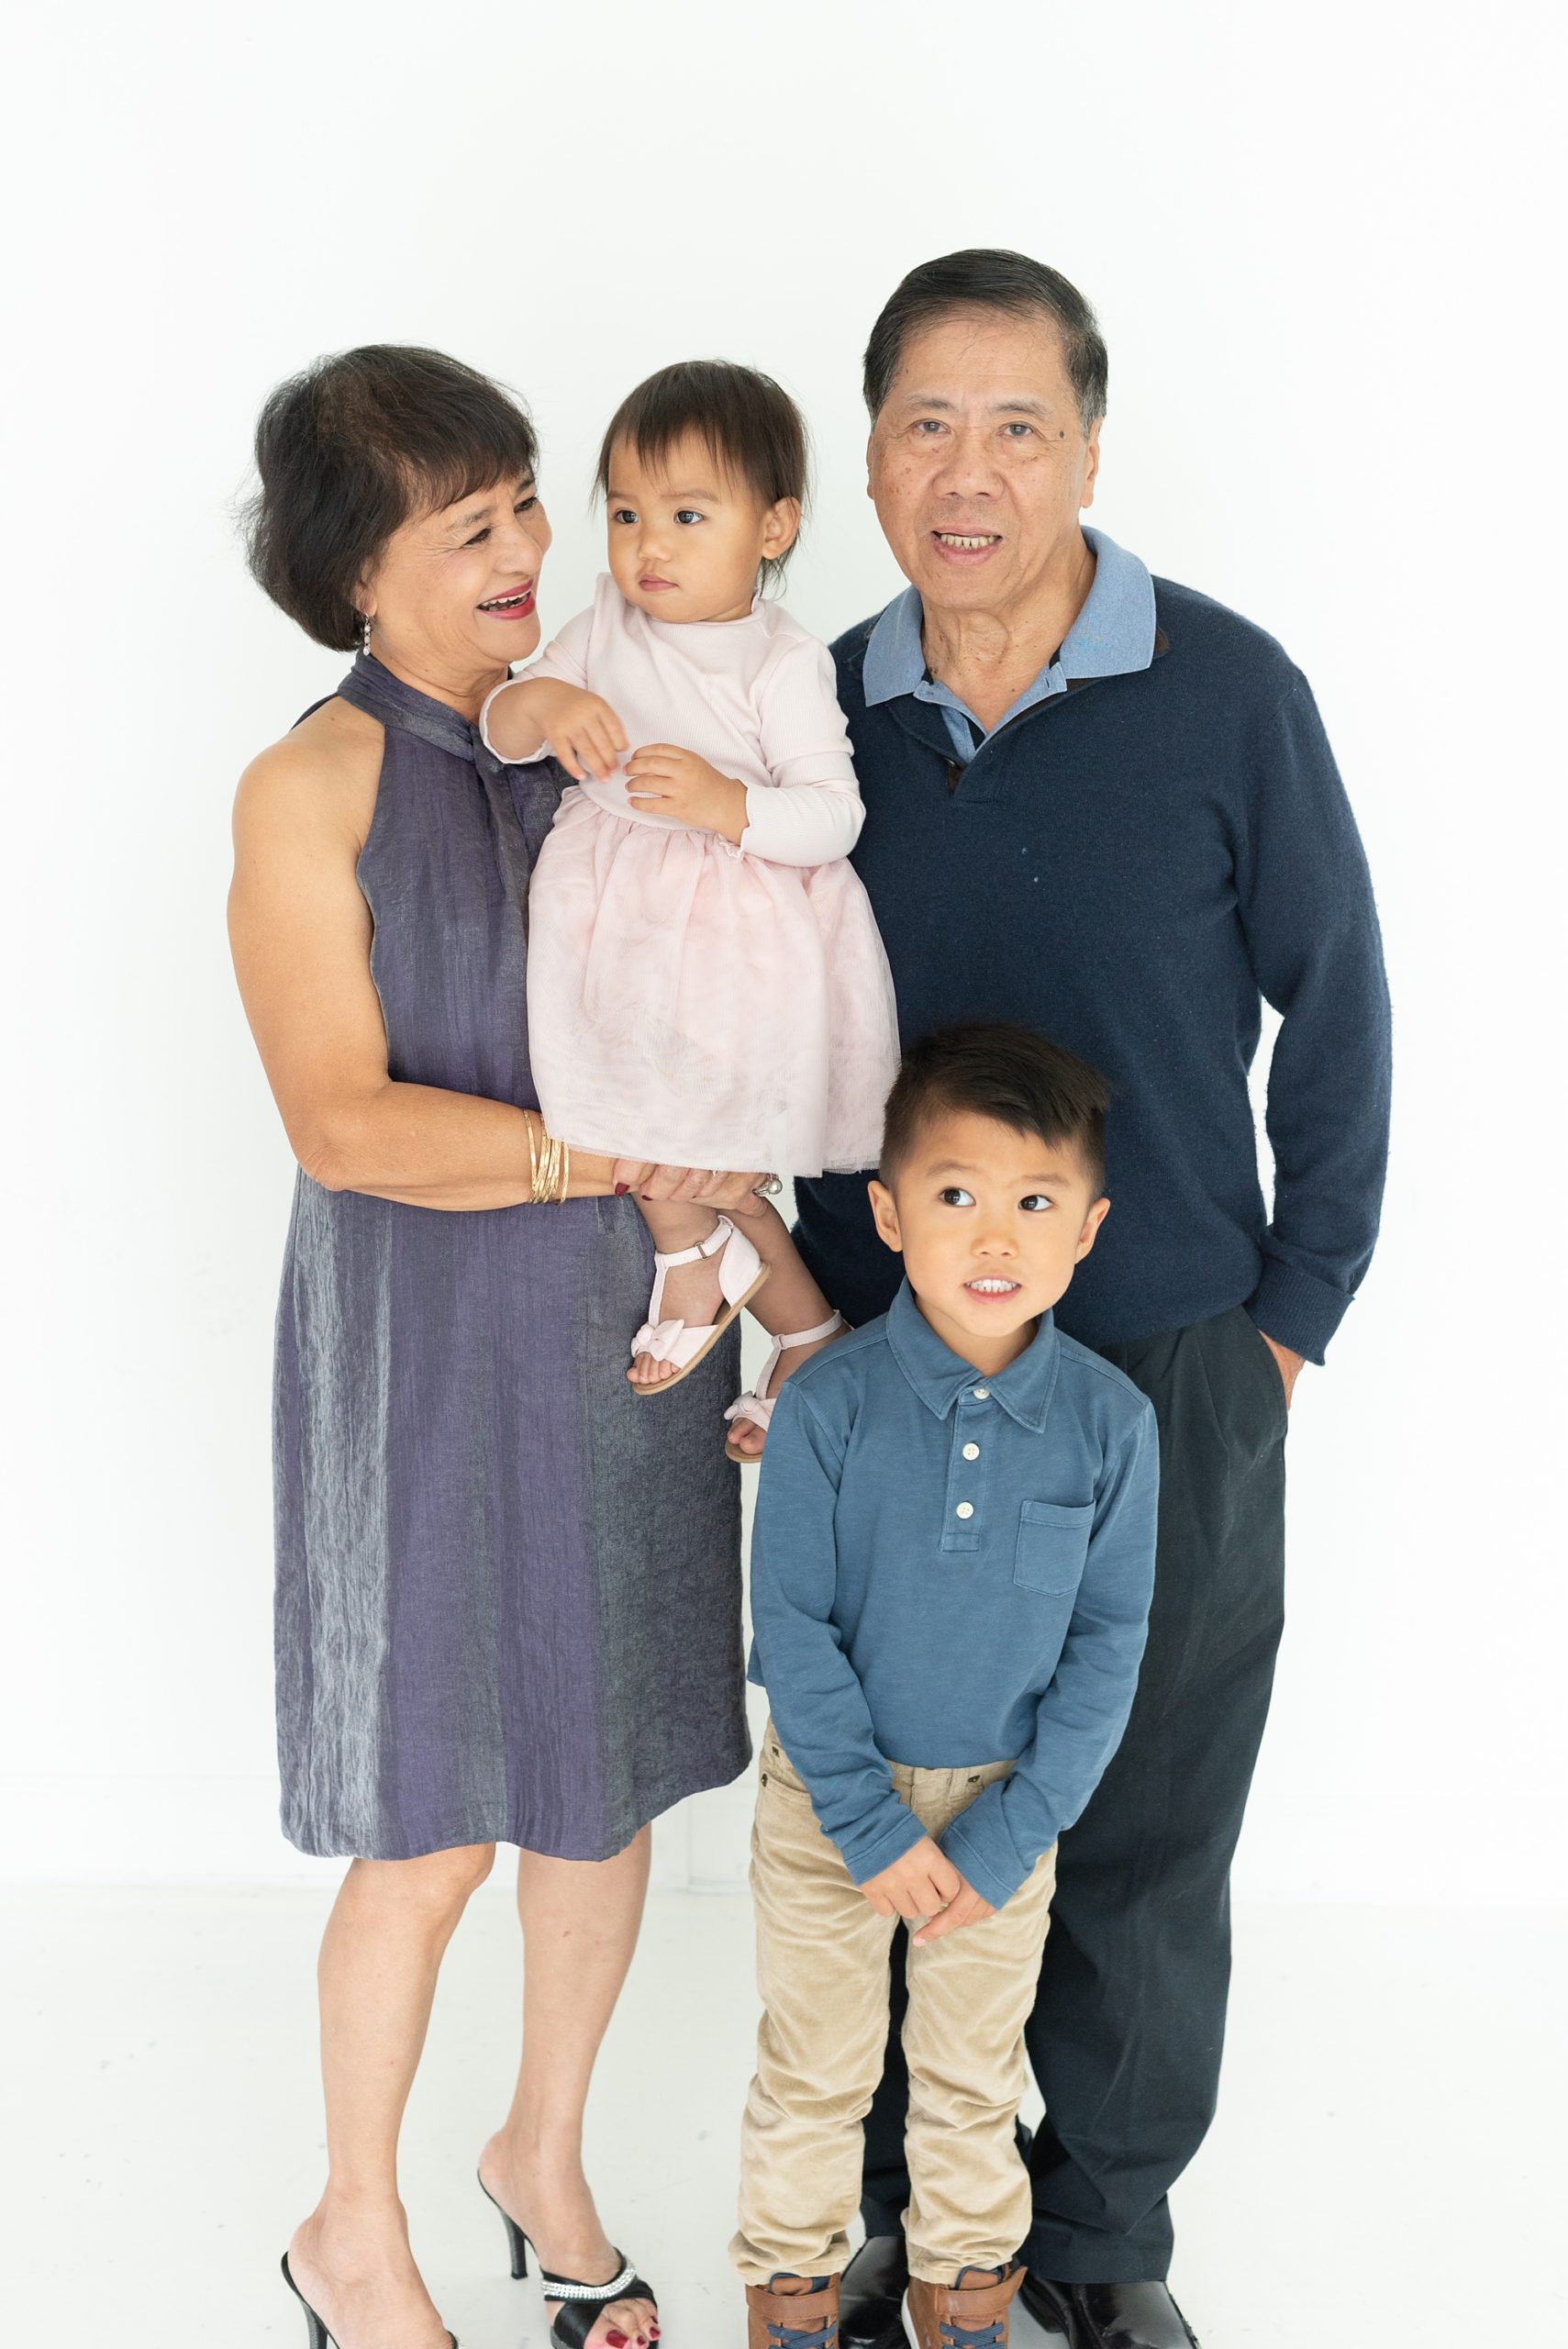 grandparents pose with young grandchildren during TX family photos